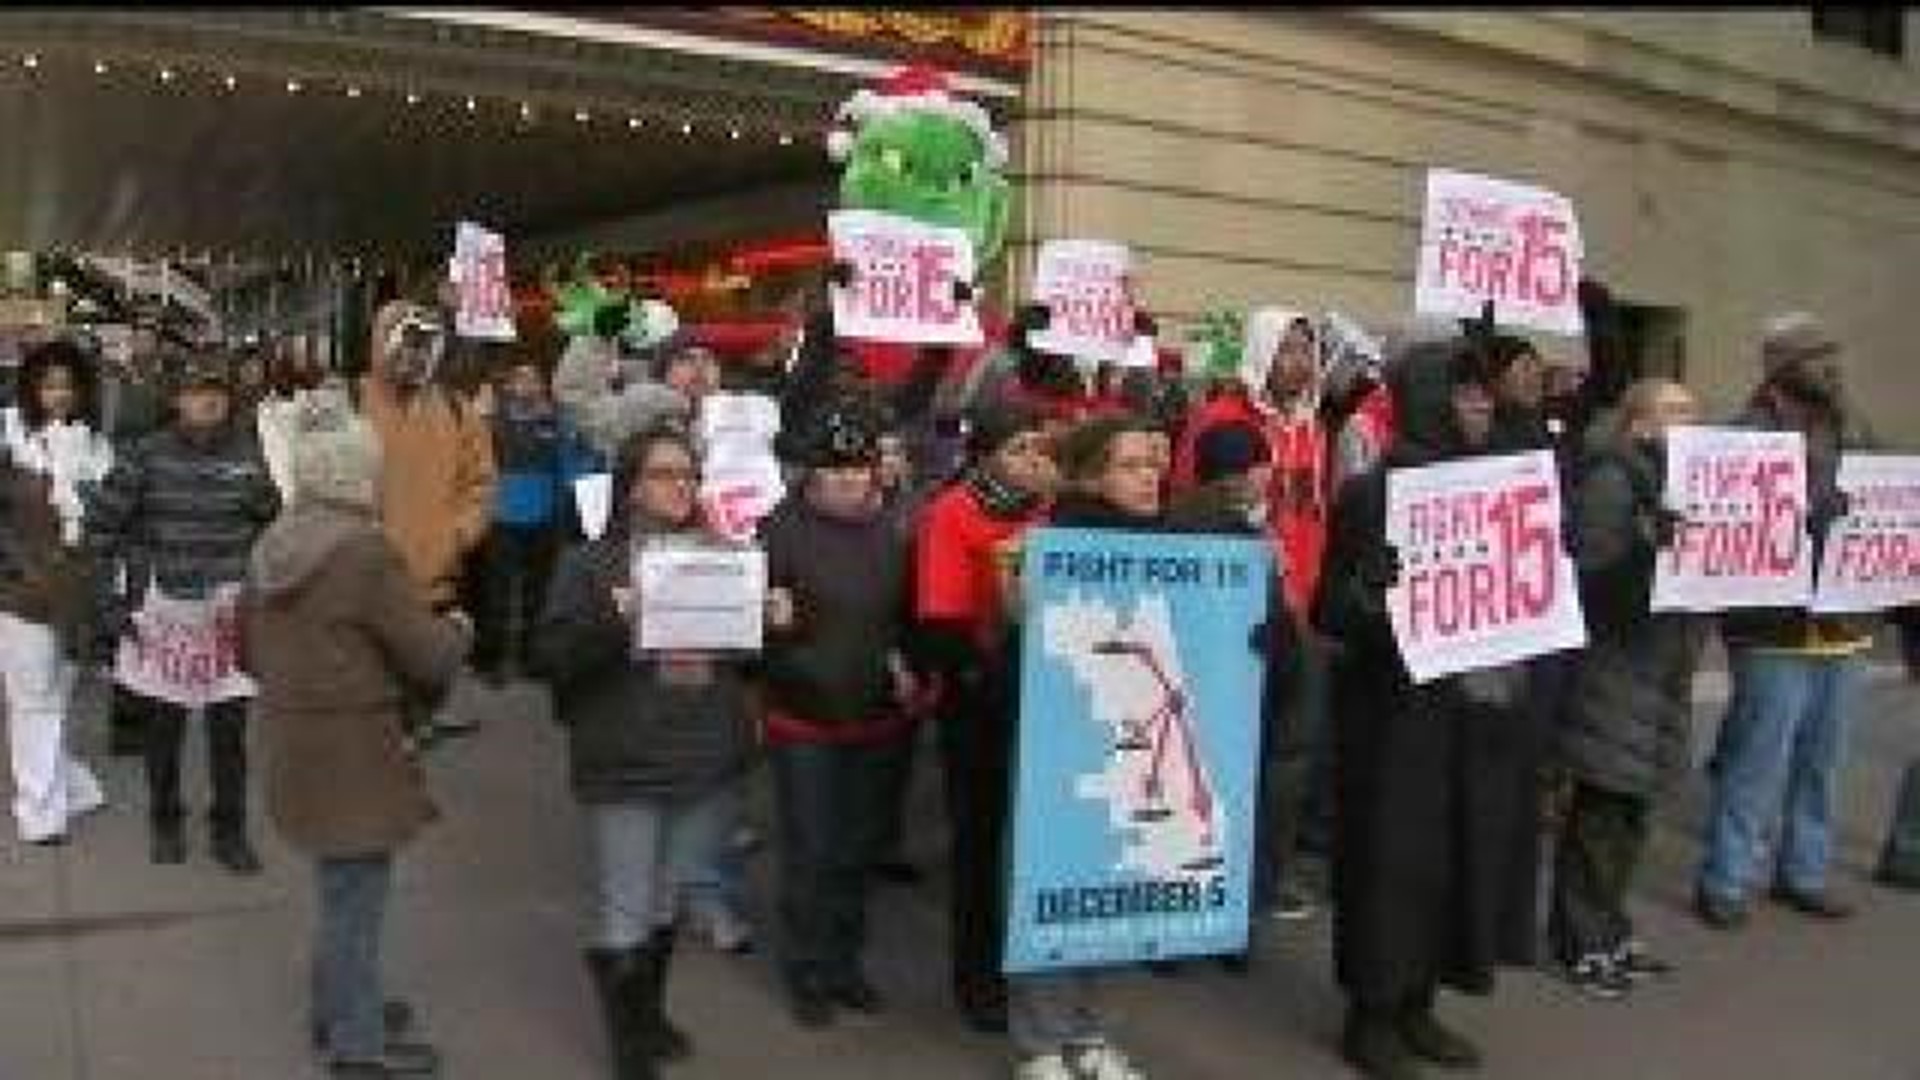 Fast food workers want higher wages